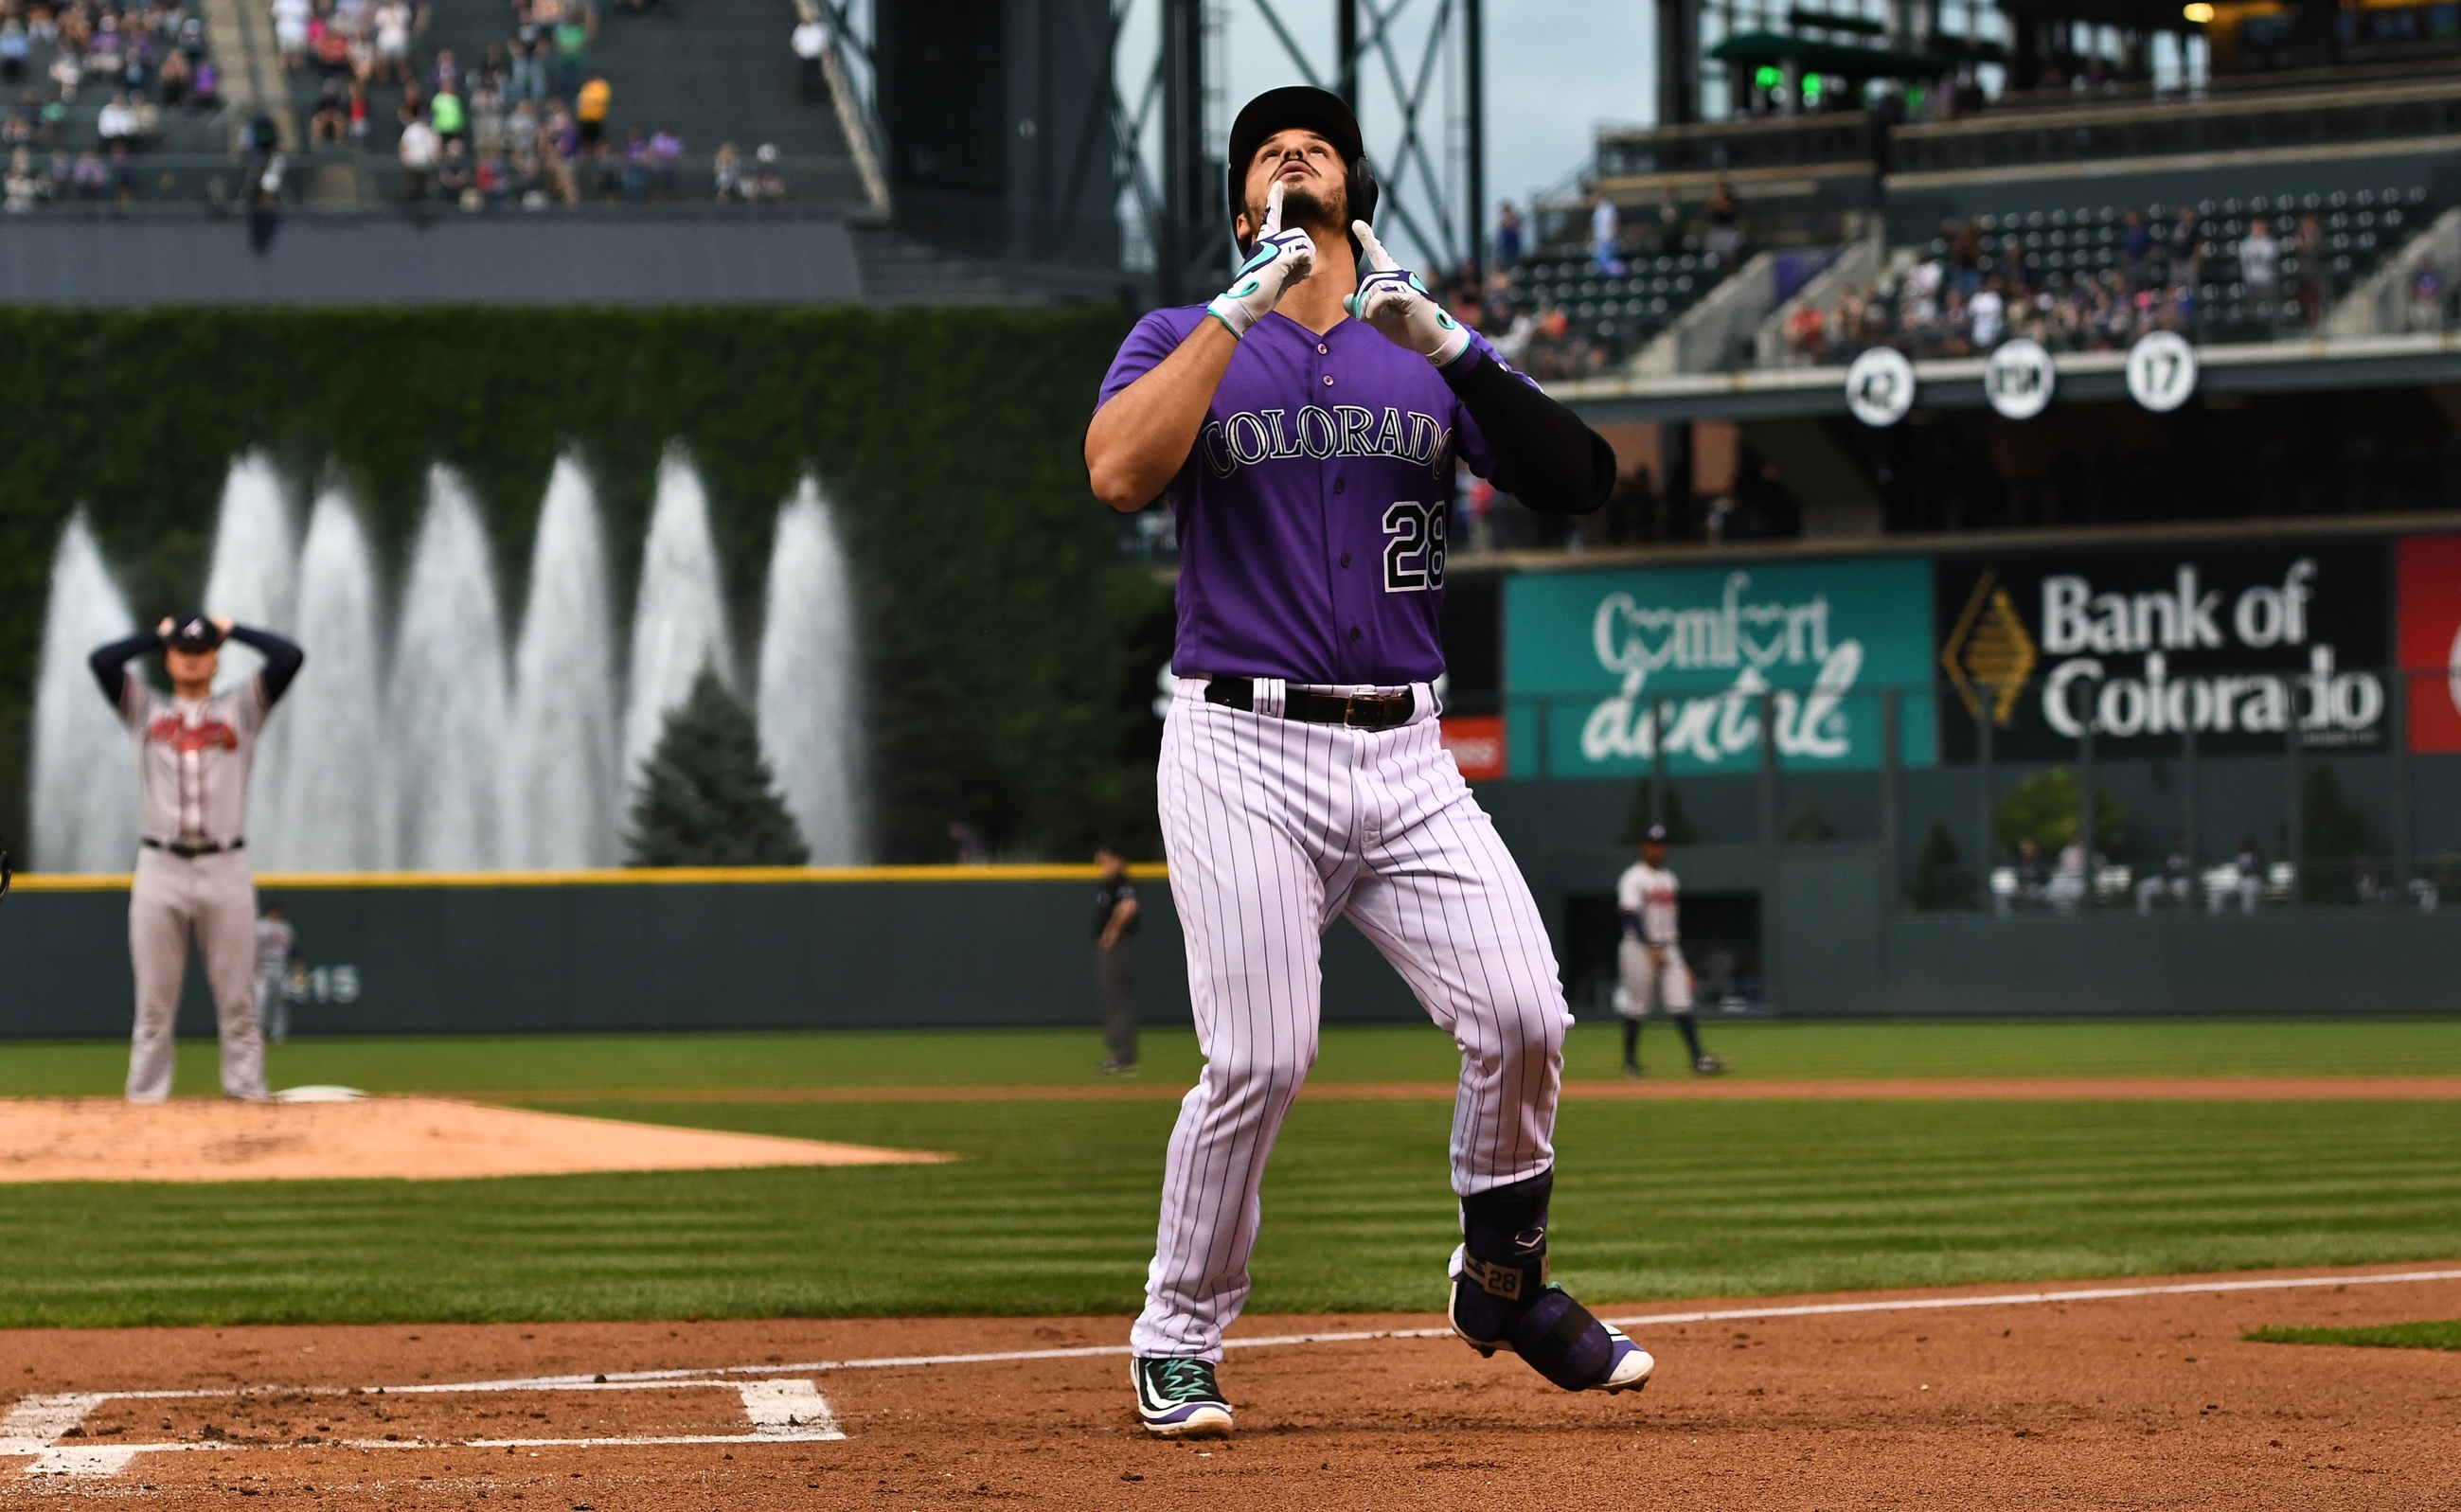 Aug 15, 2017; Denver, CO, USA; Colorado Rockies third baseman Nolan Arenado (28) is celebrates his solo home run in the first inning against the Atlanta Braves at Coors Field. Mandatory Credit: Ron Chenoy-USA TODAY Sports